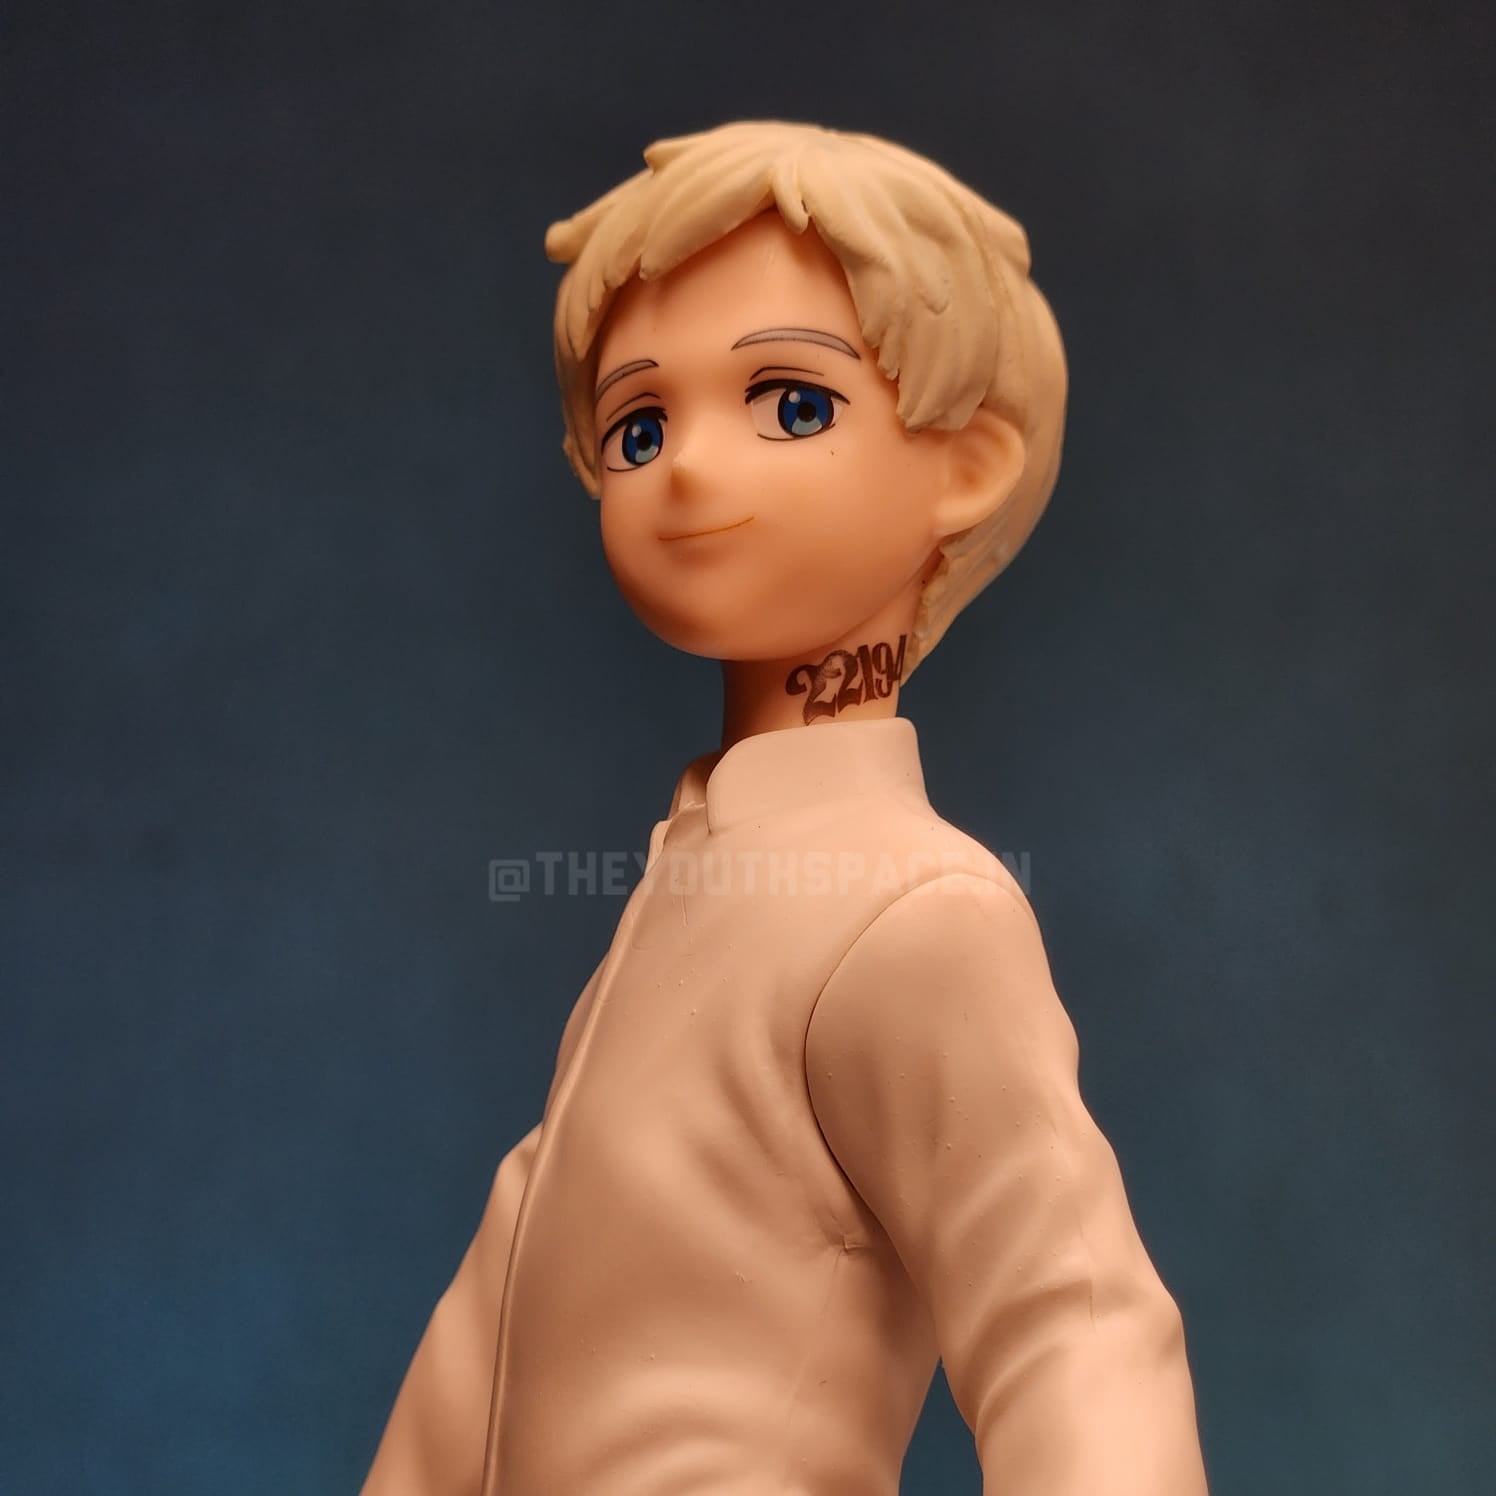 Norman Emma & Ray Action figure from The Promised Neverland